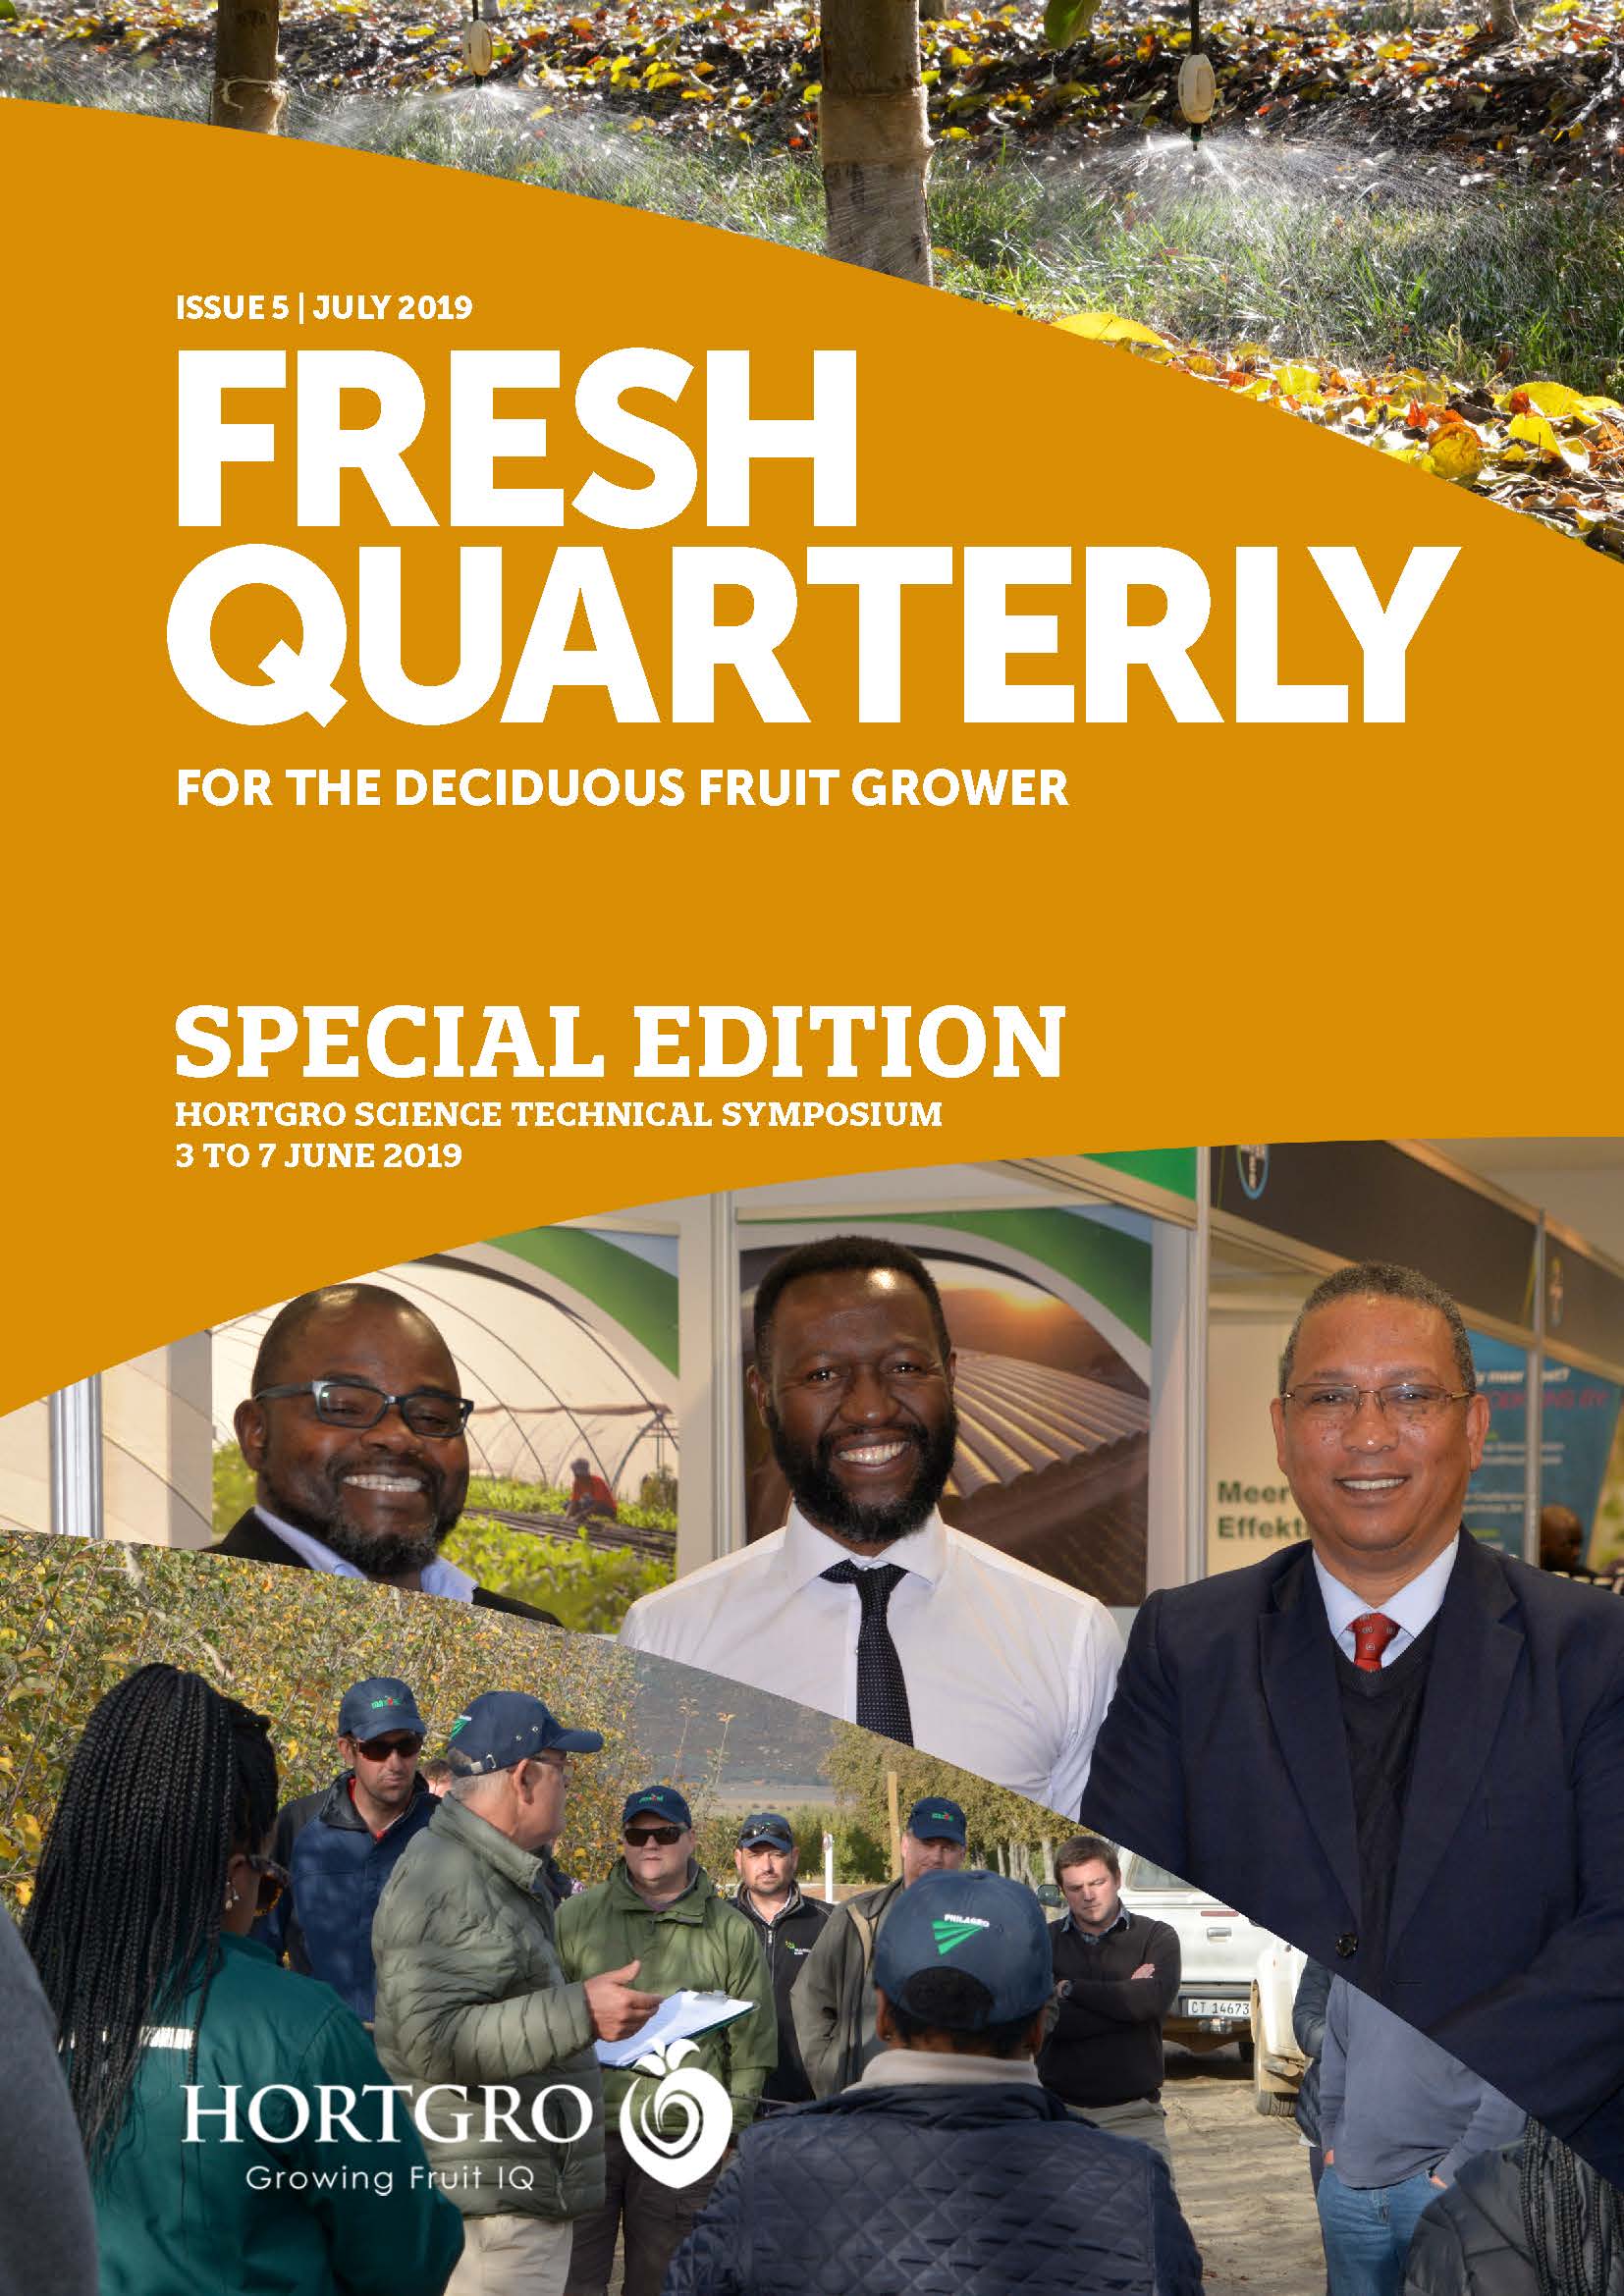 Cover for Fresh Quarterly July 2019 designed by Anna Mouton.